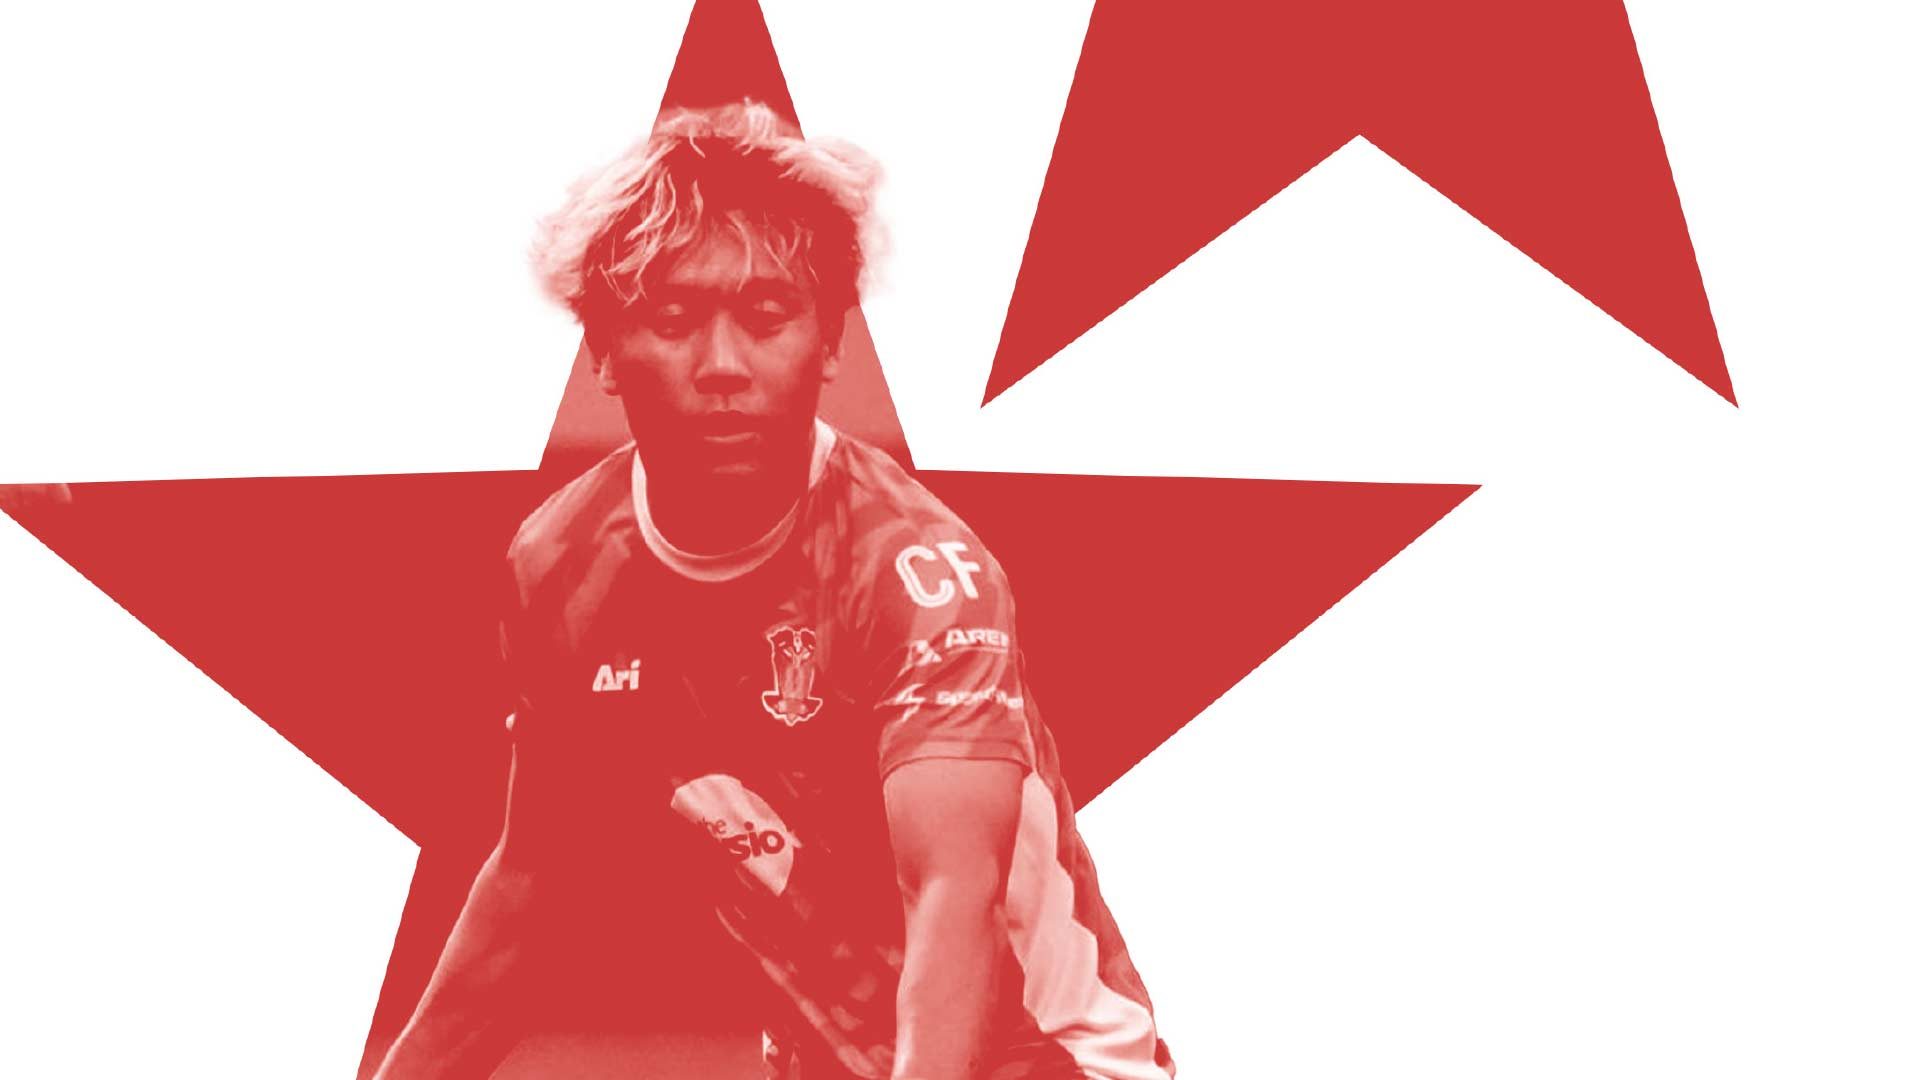 An image of a Singapore football player against a backdrop of the stars from the Singapore flag